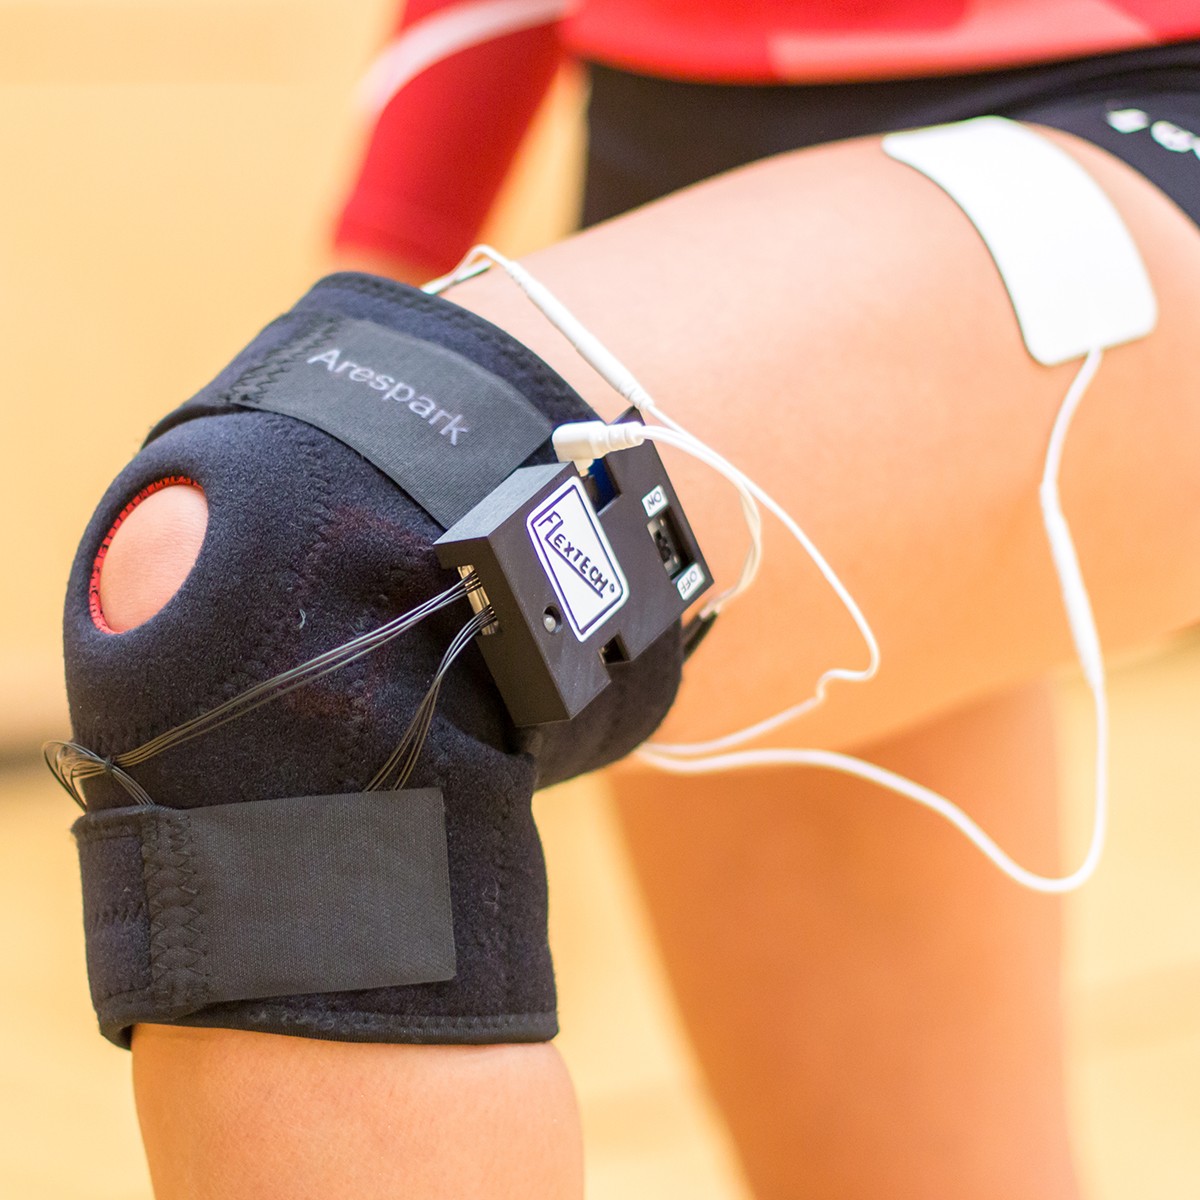 A knee brace with smart electronic attachments